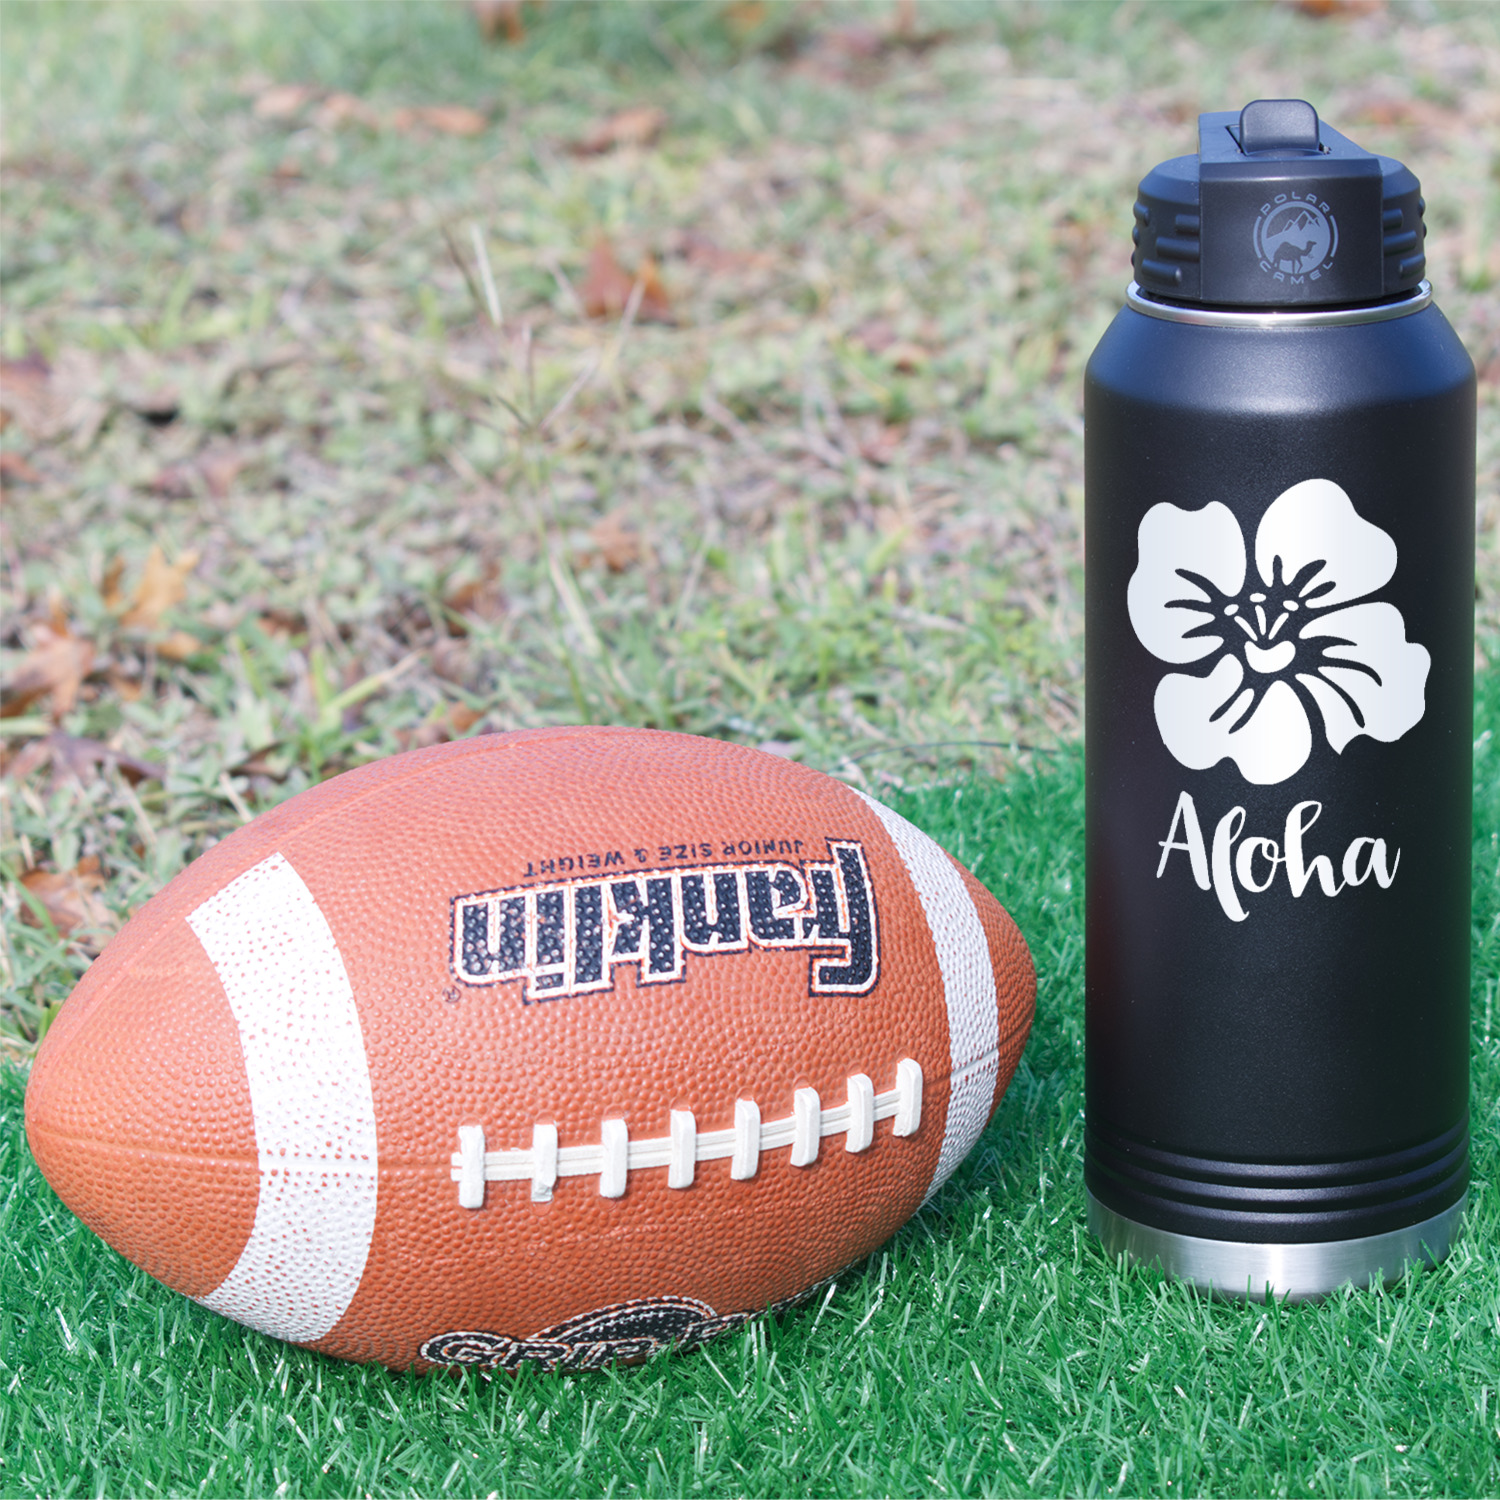 https://www.youcustomizeit.com/common/MAKE/1112610/Preppy-Hibiscus-Laser-Engraved-Water-Bottles-In-Context.jpg?lm=1667407726